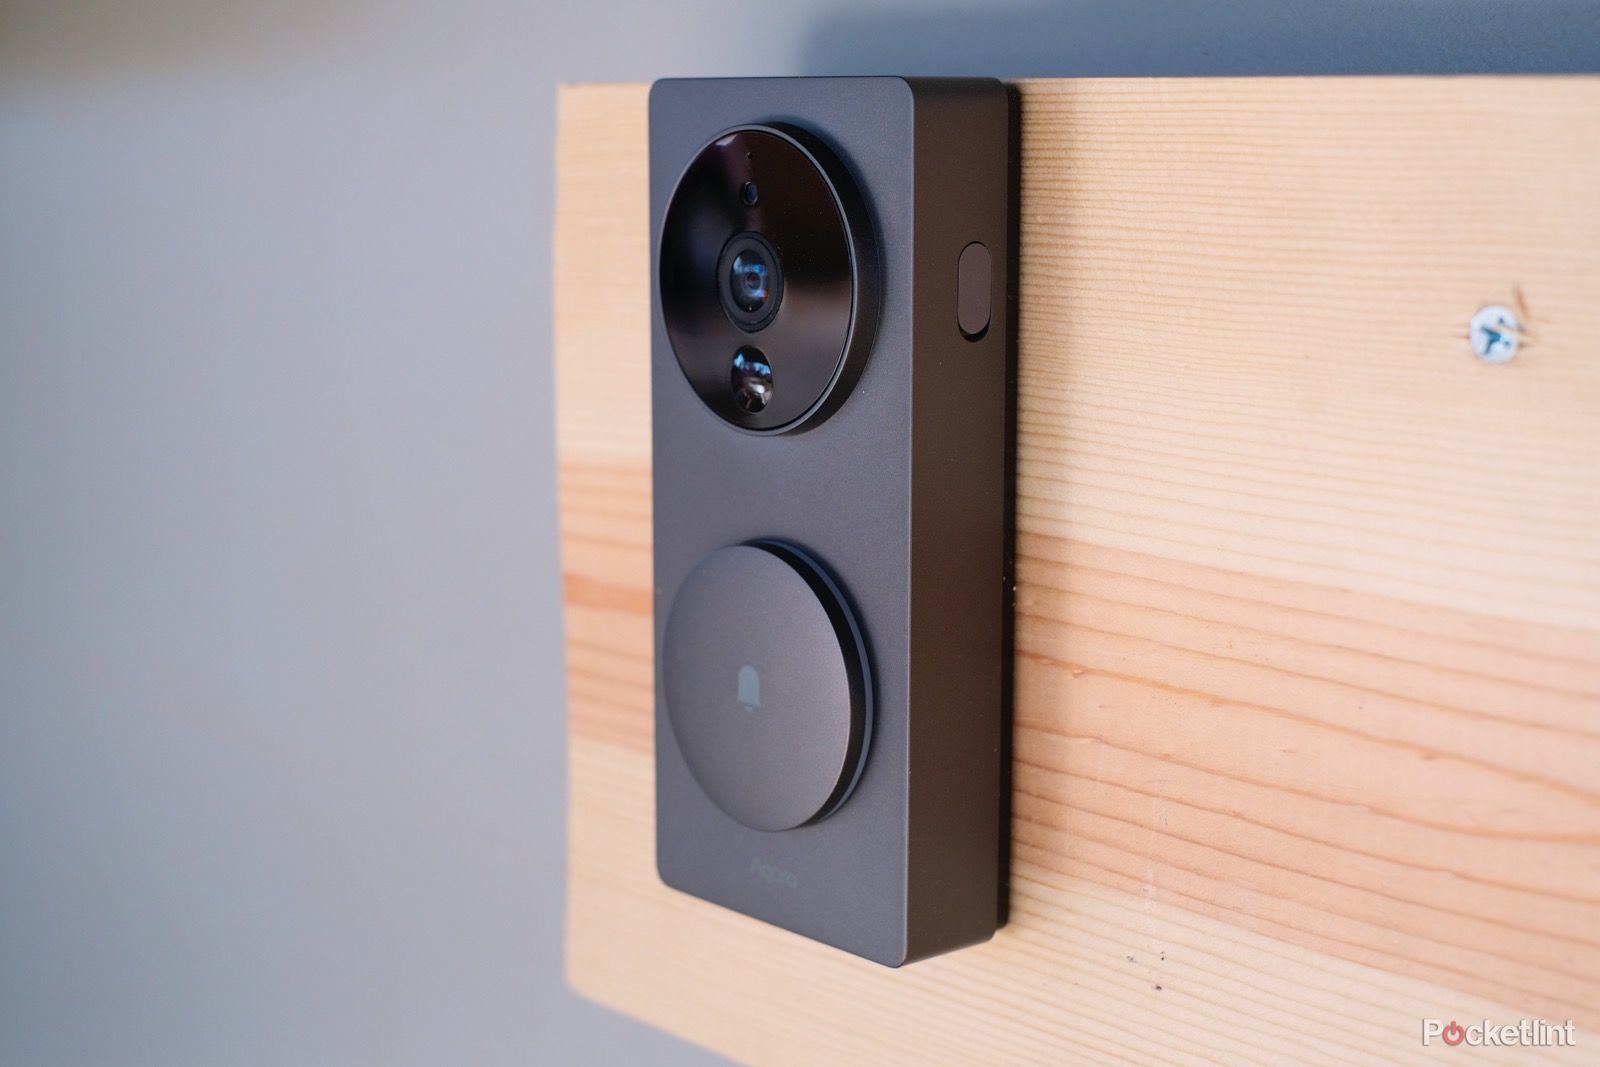 New Ring Doorbell Has Head-to-Toe View - CNET